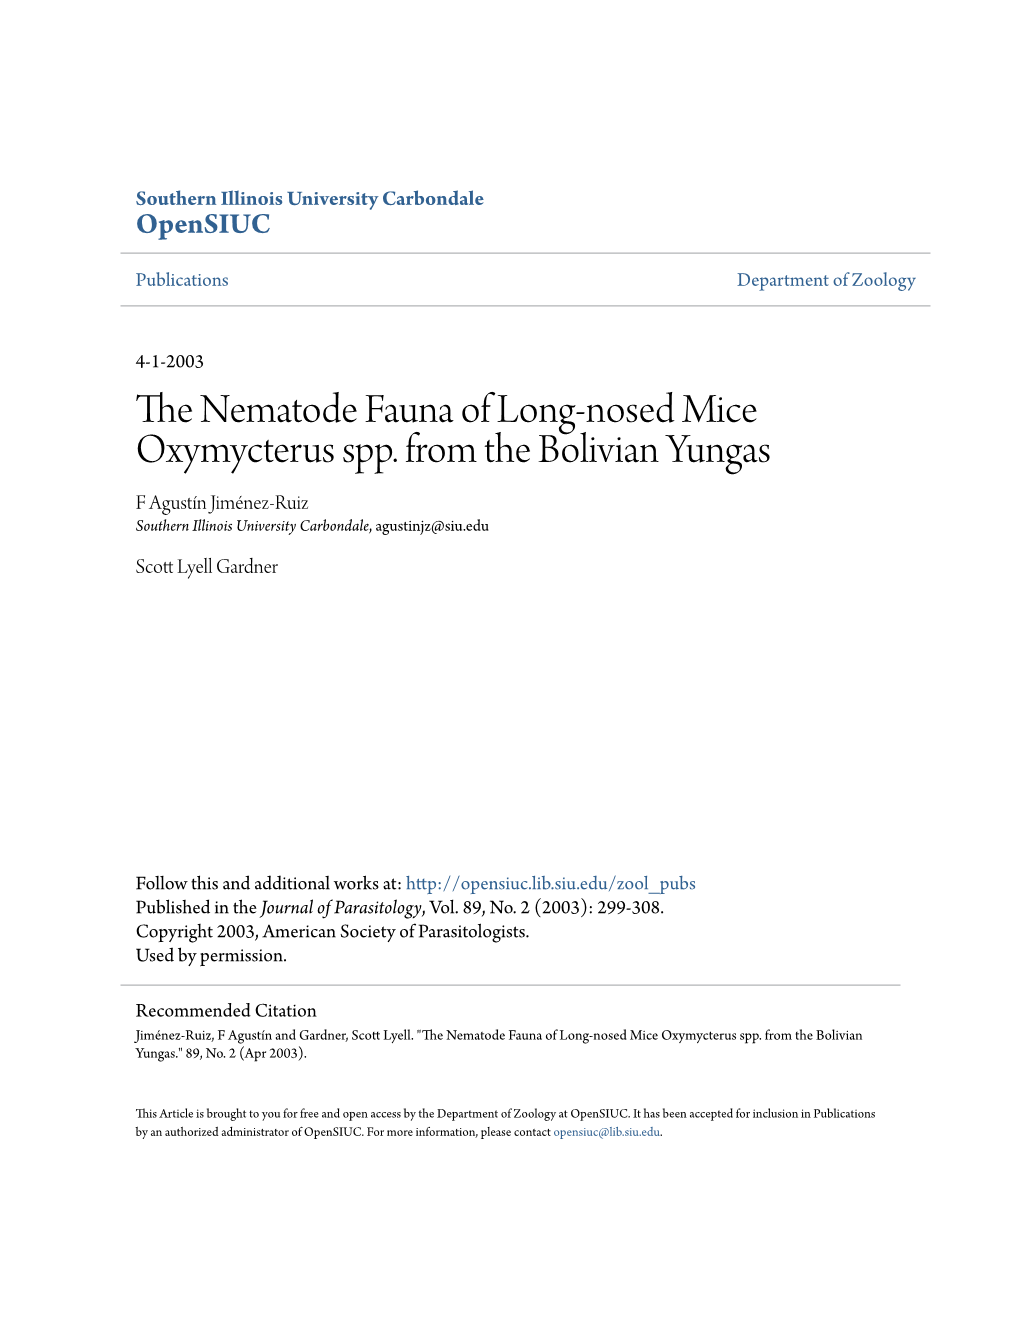 The Nematode Fauna of Long-Nosed Mice Oxymycterus Spp. from the Bolivian Yungas